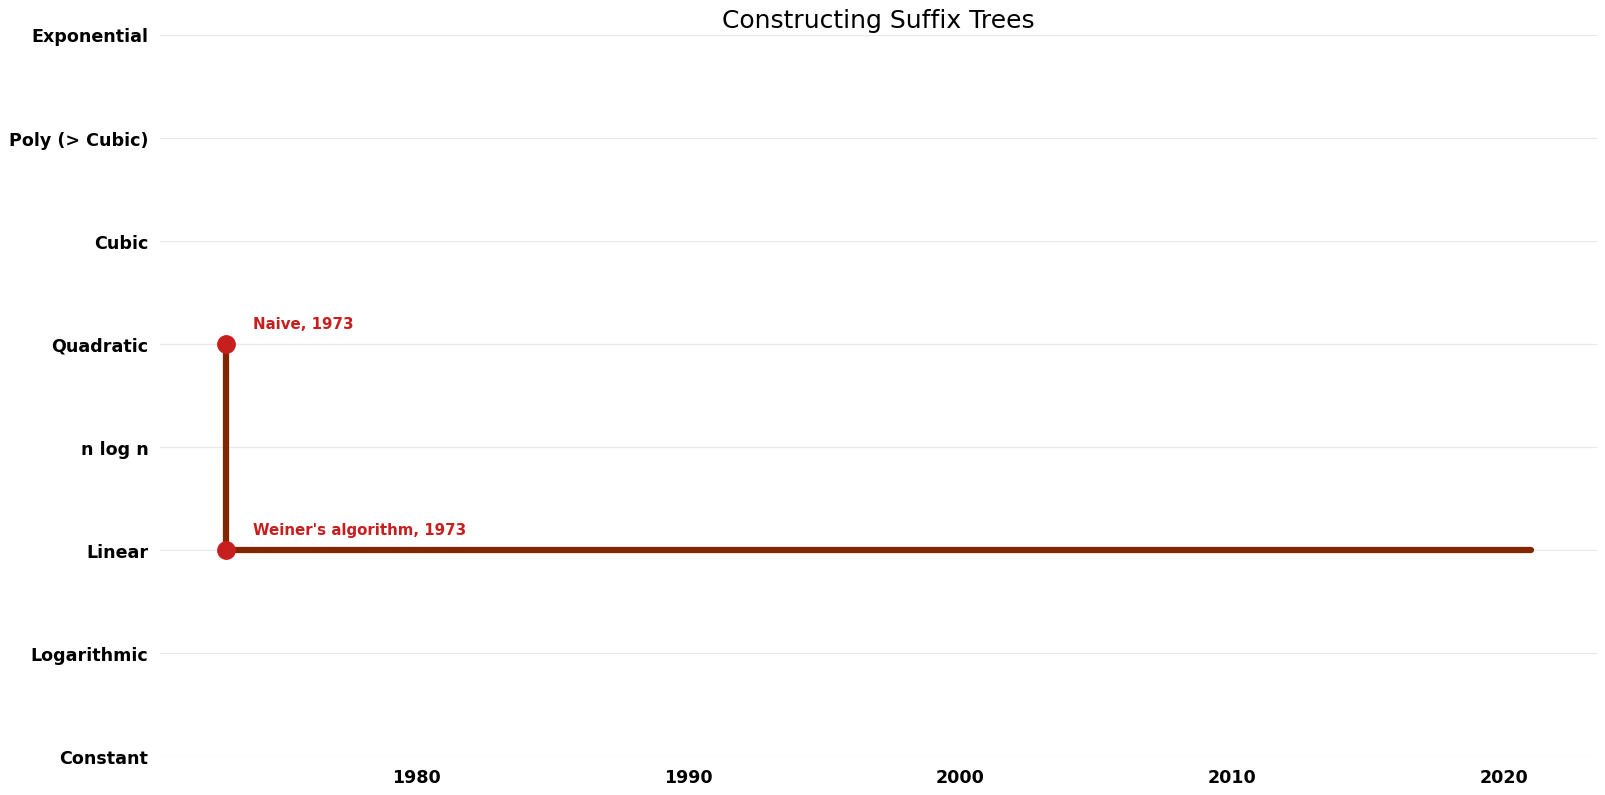 File:Constructing Suffix Trees - Time.png